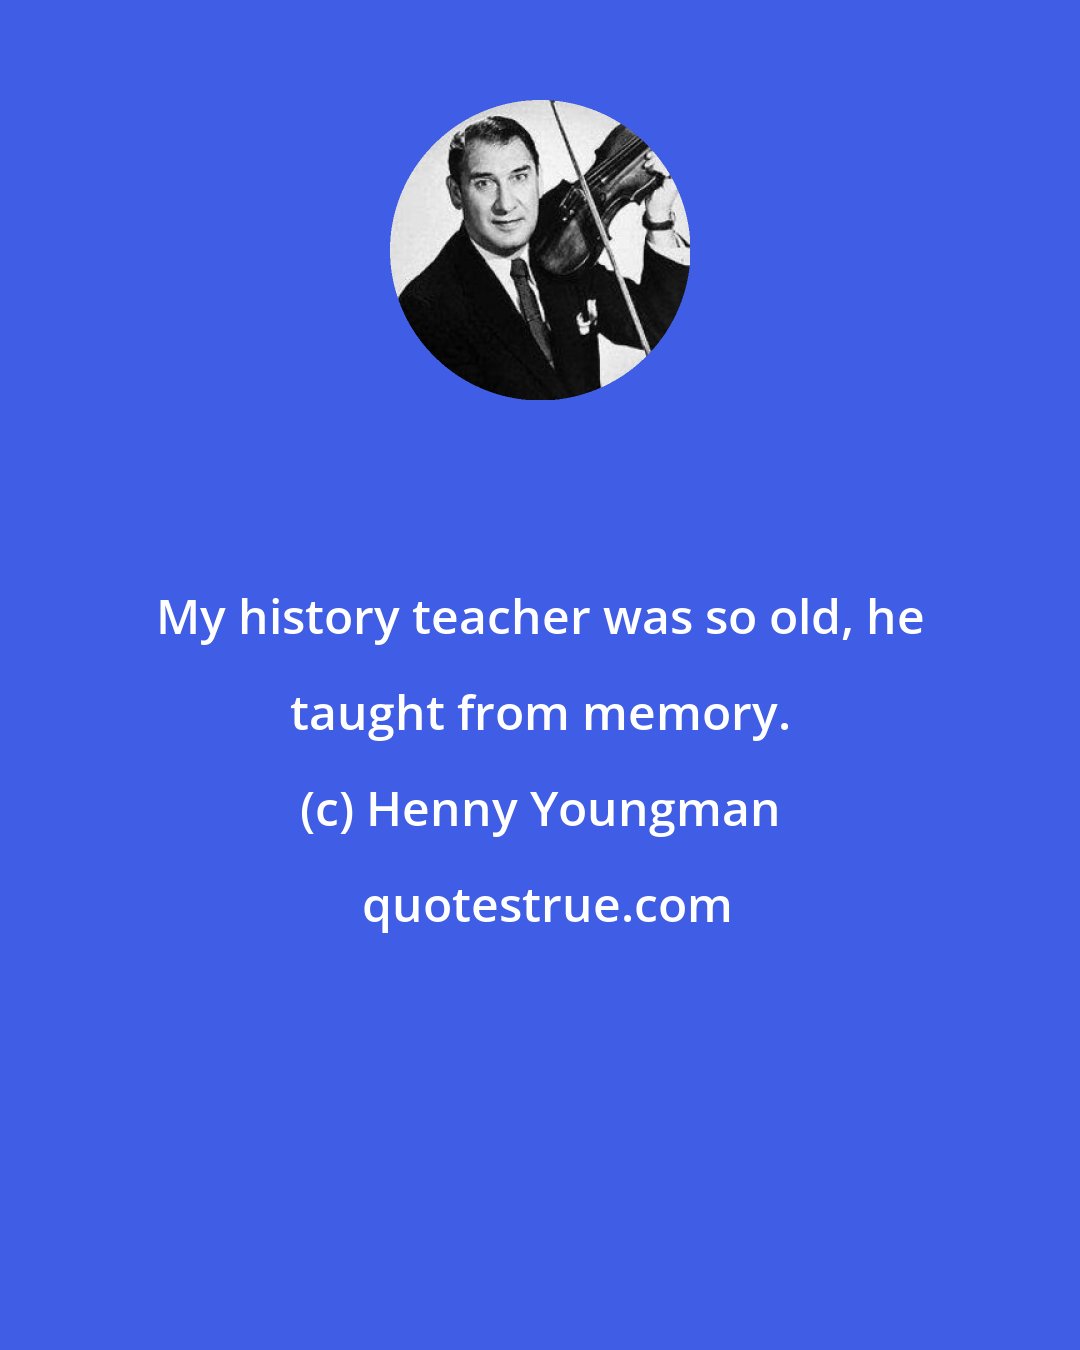 Henny Youngman: My history teacher was so old, he taught from memory.